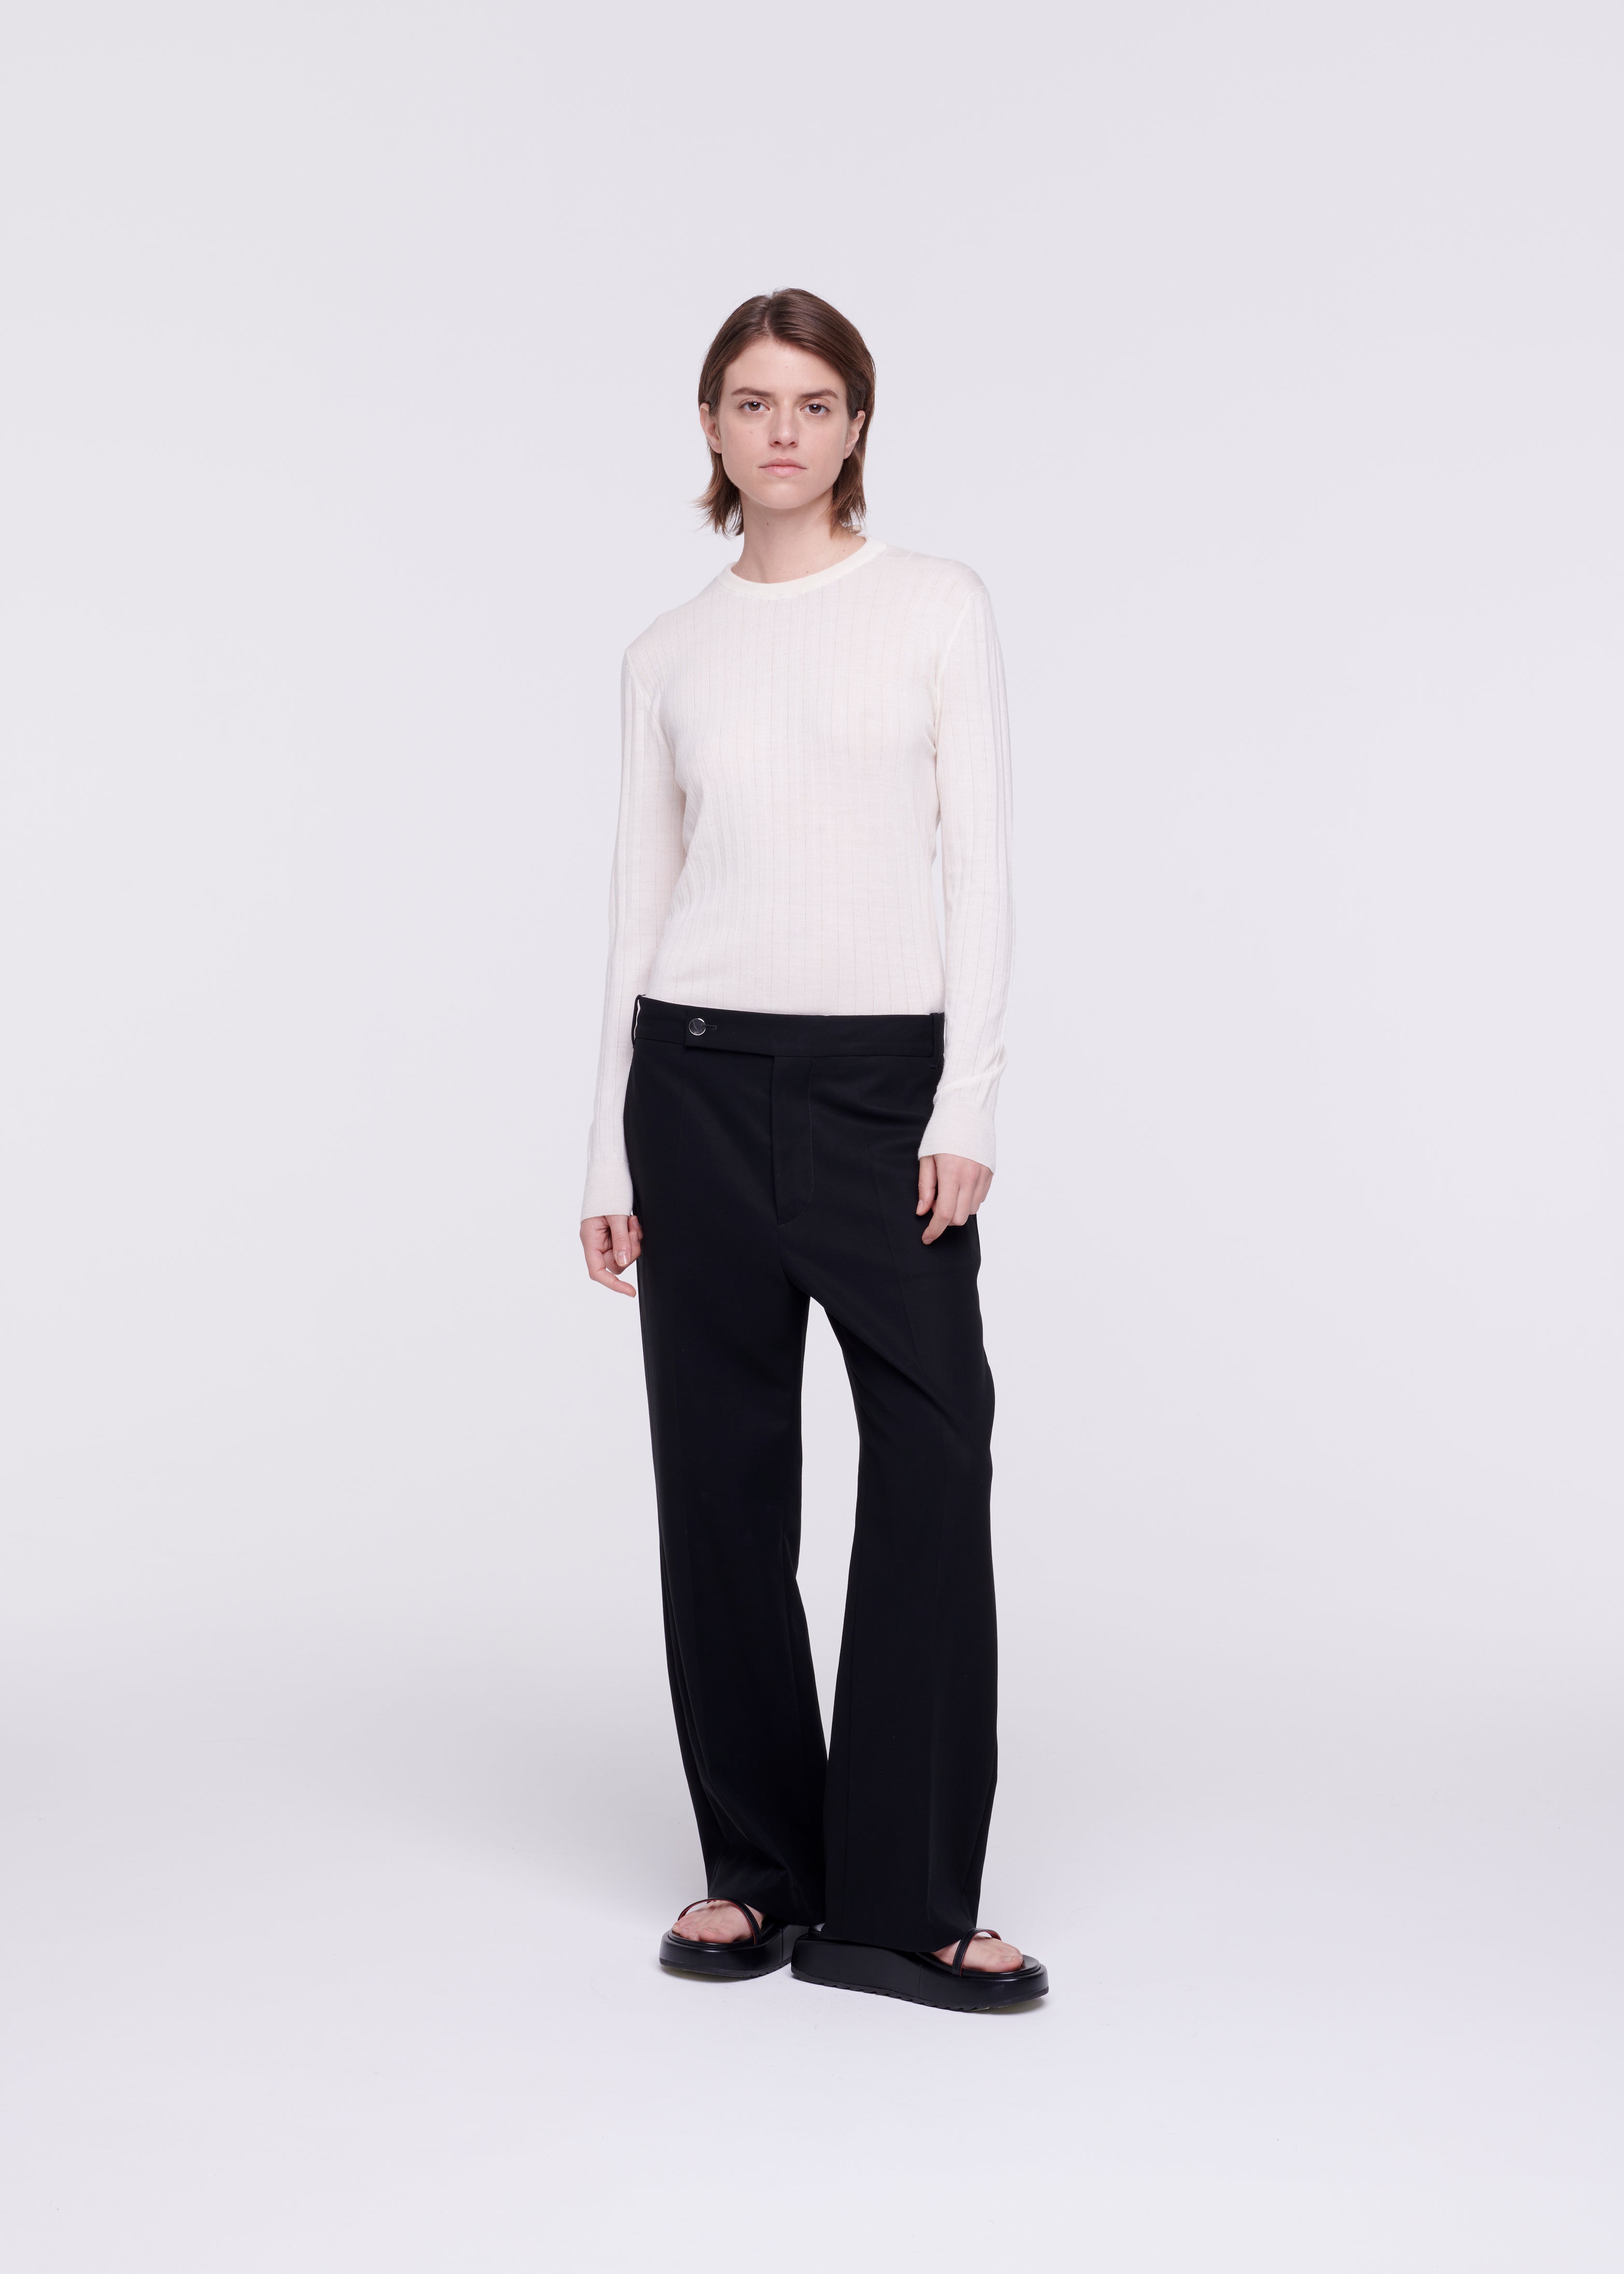 BLACK FLARED PANTS IN CREPE COTTON